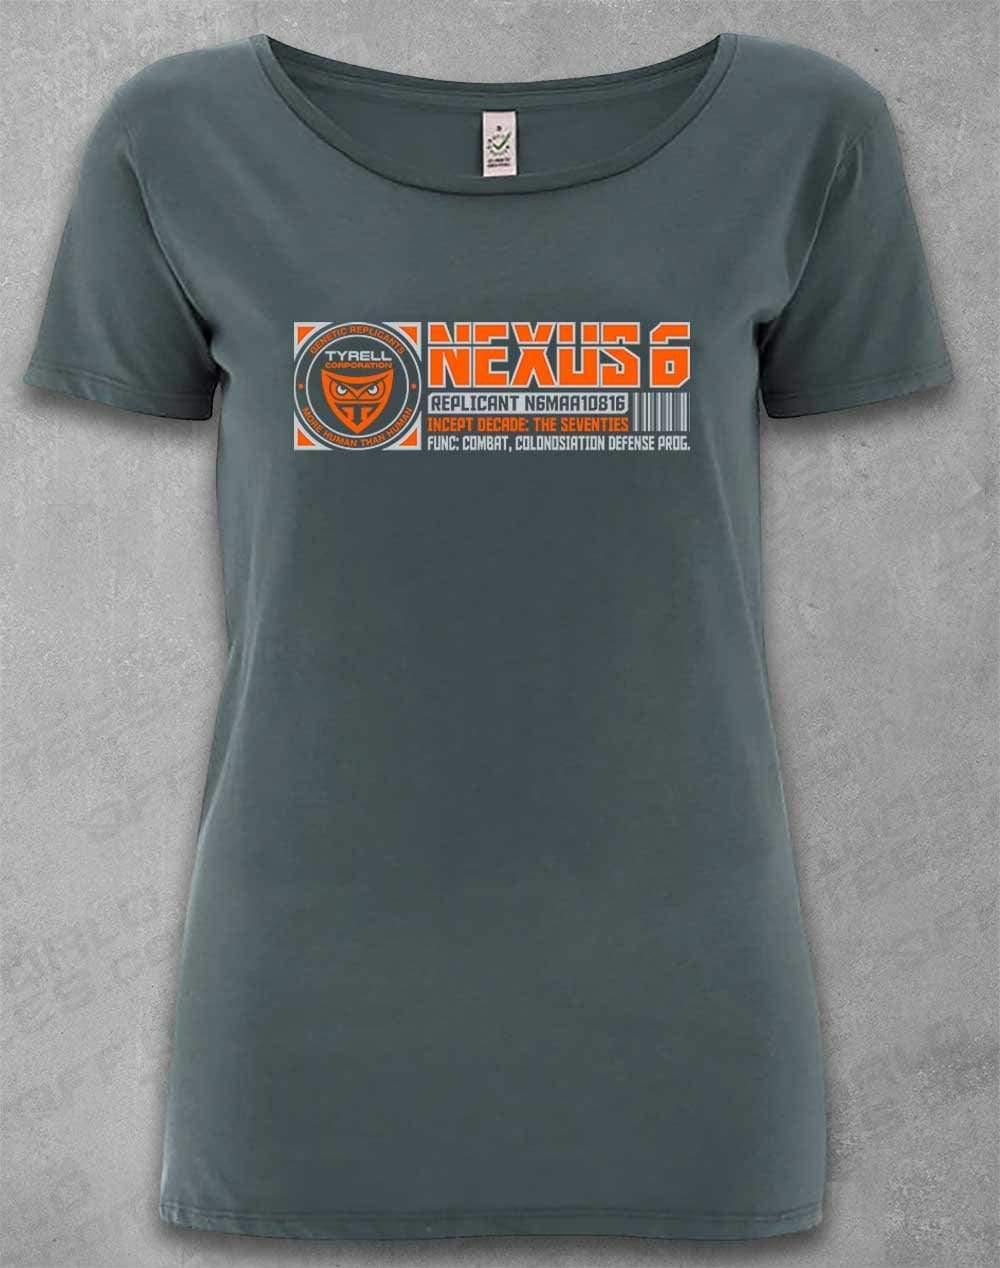 DELUXE Nexus 6 Replicant Incept Date (CHOOSE YOUR DECADE!) Organic Scoop Neck T-Shirt The Seventies - Light Charcoal / 8-10  - Off World Tees